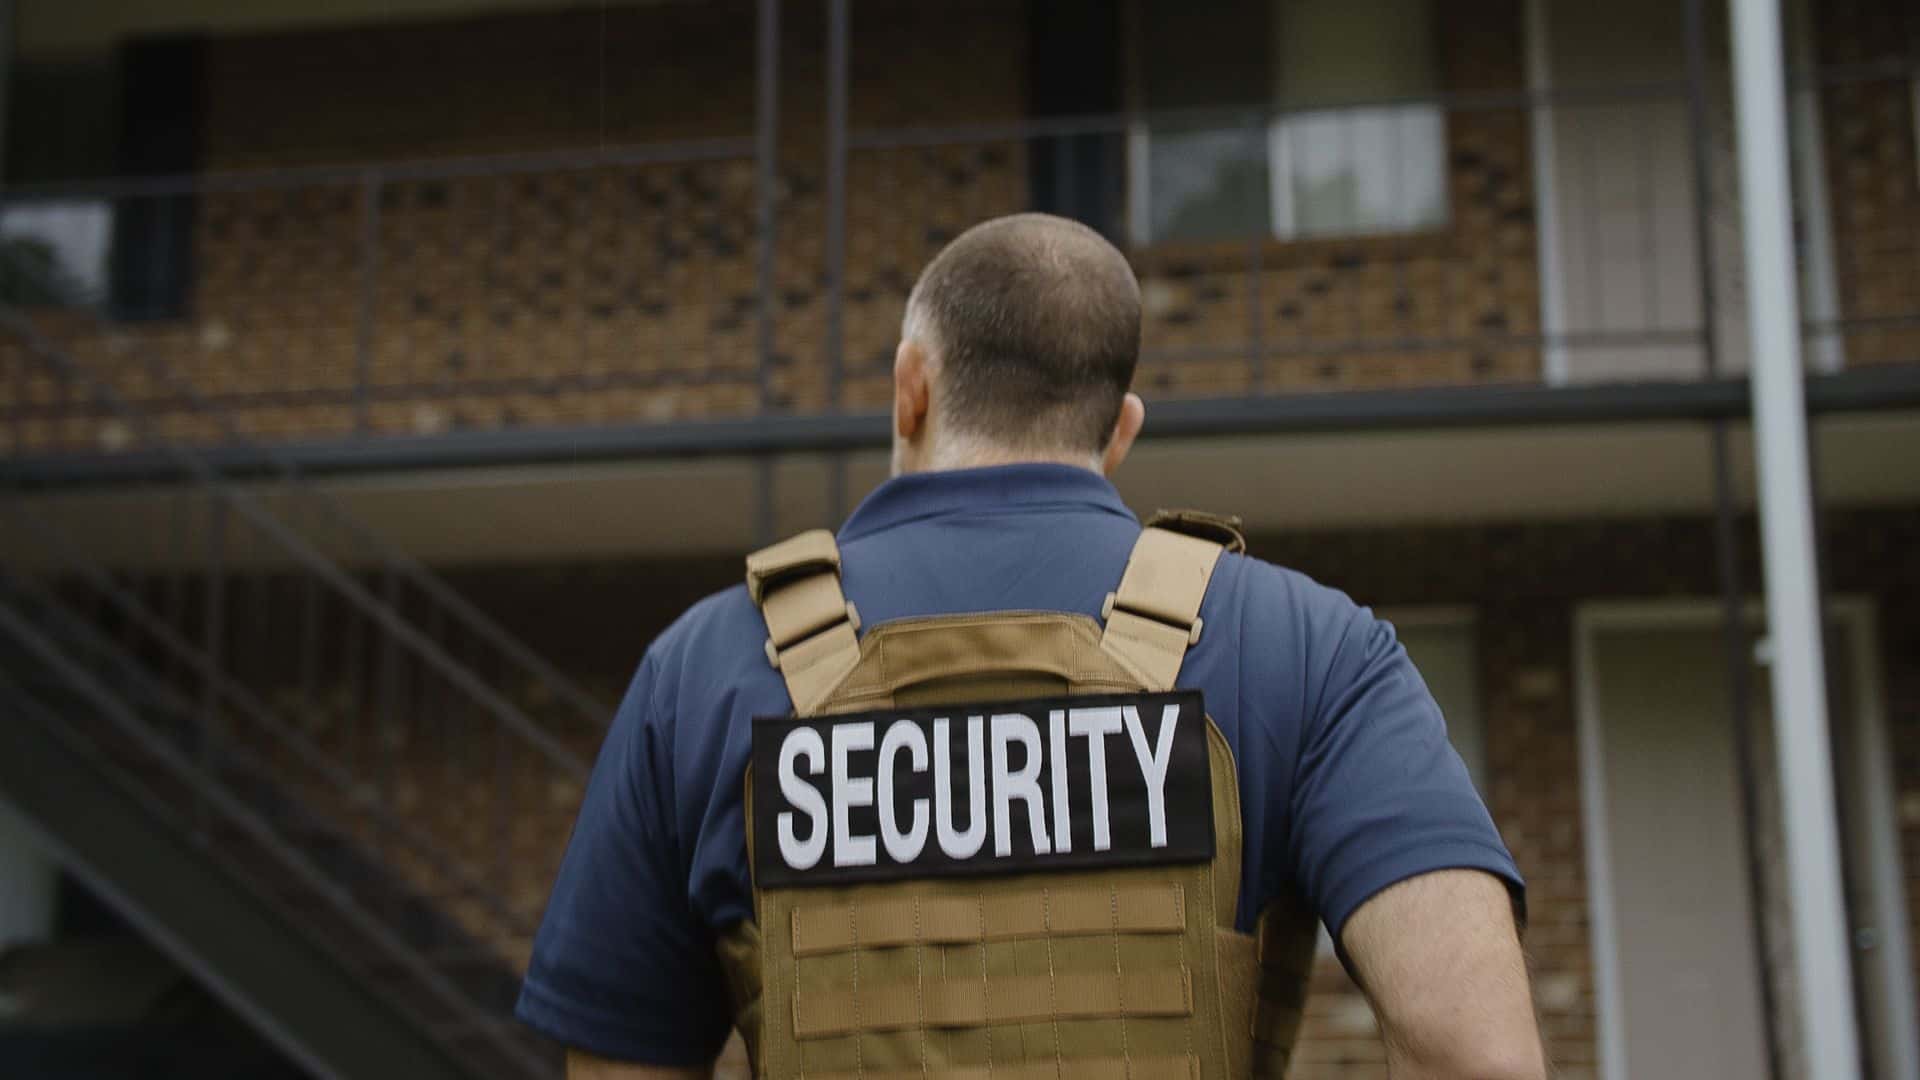 Security guard walking away from the photo wearing a protective vest and large letters on his back reading 